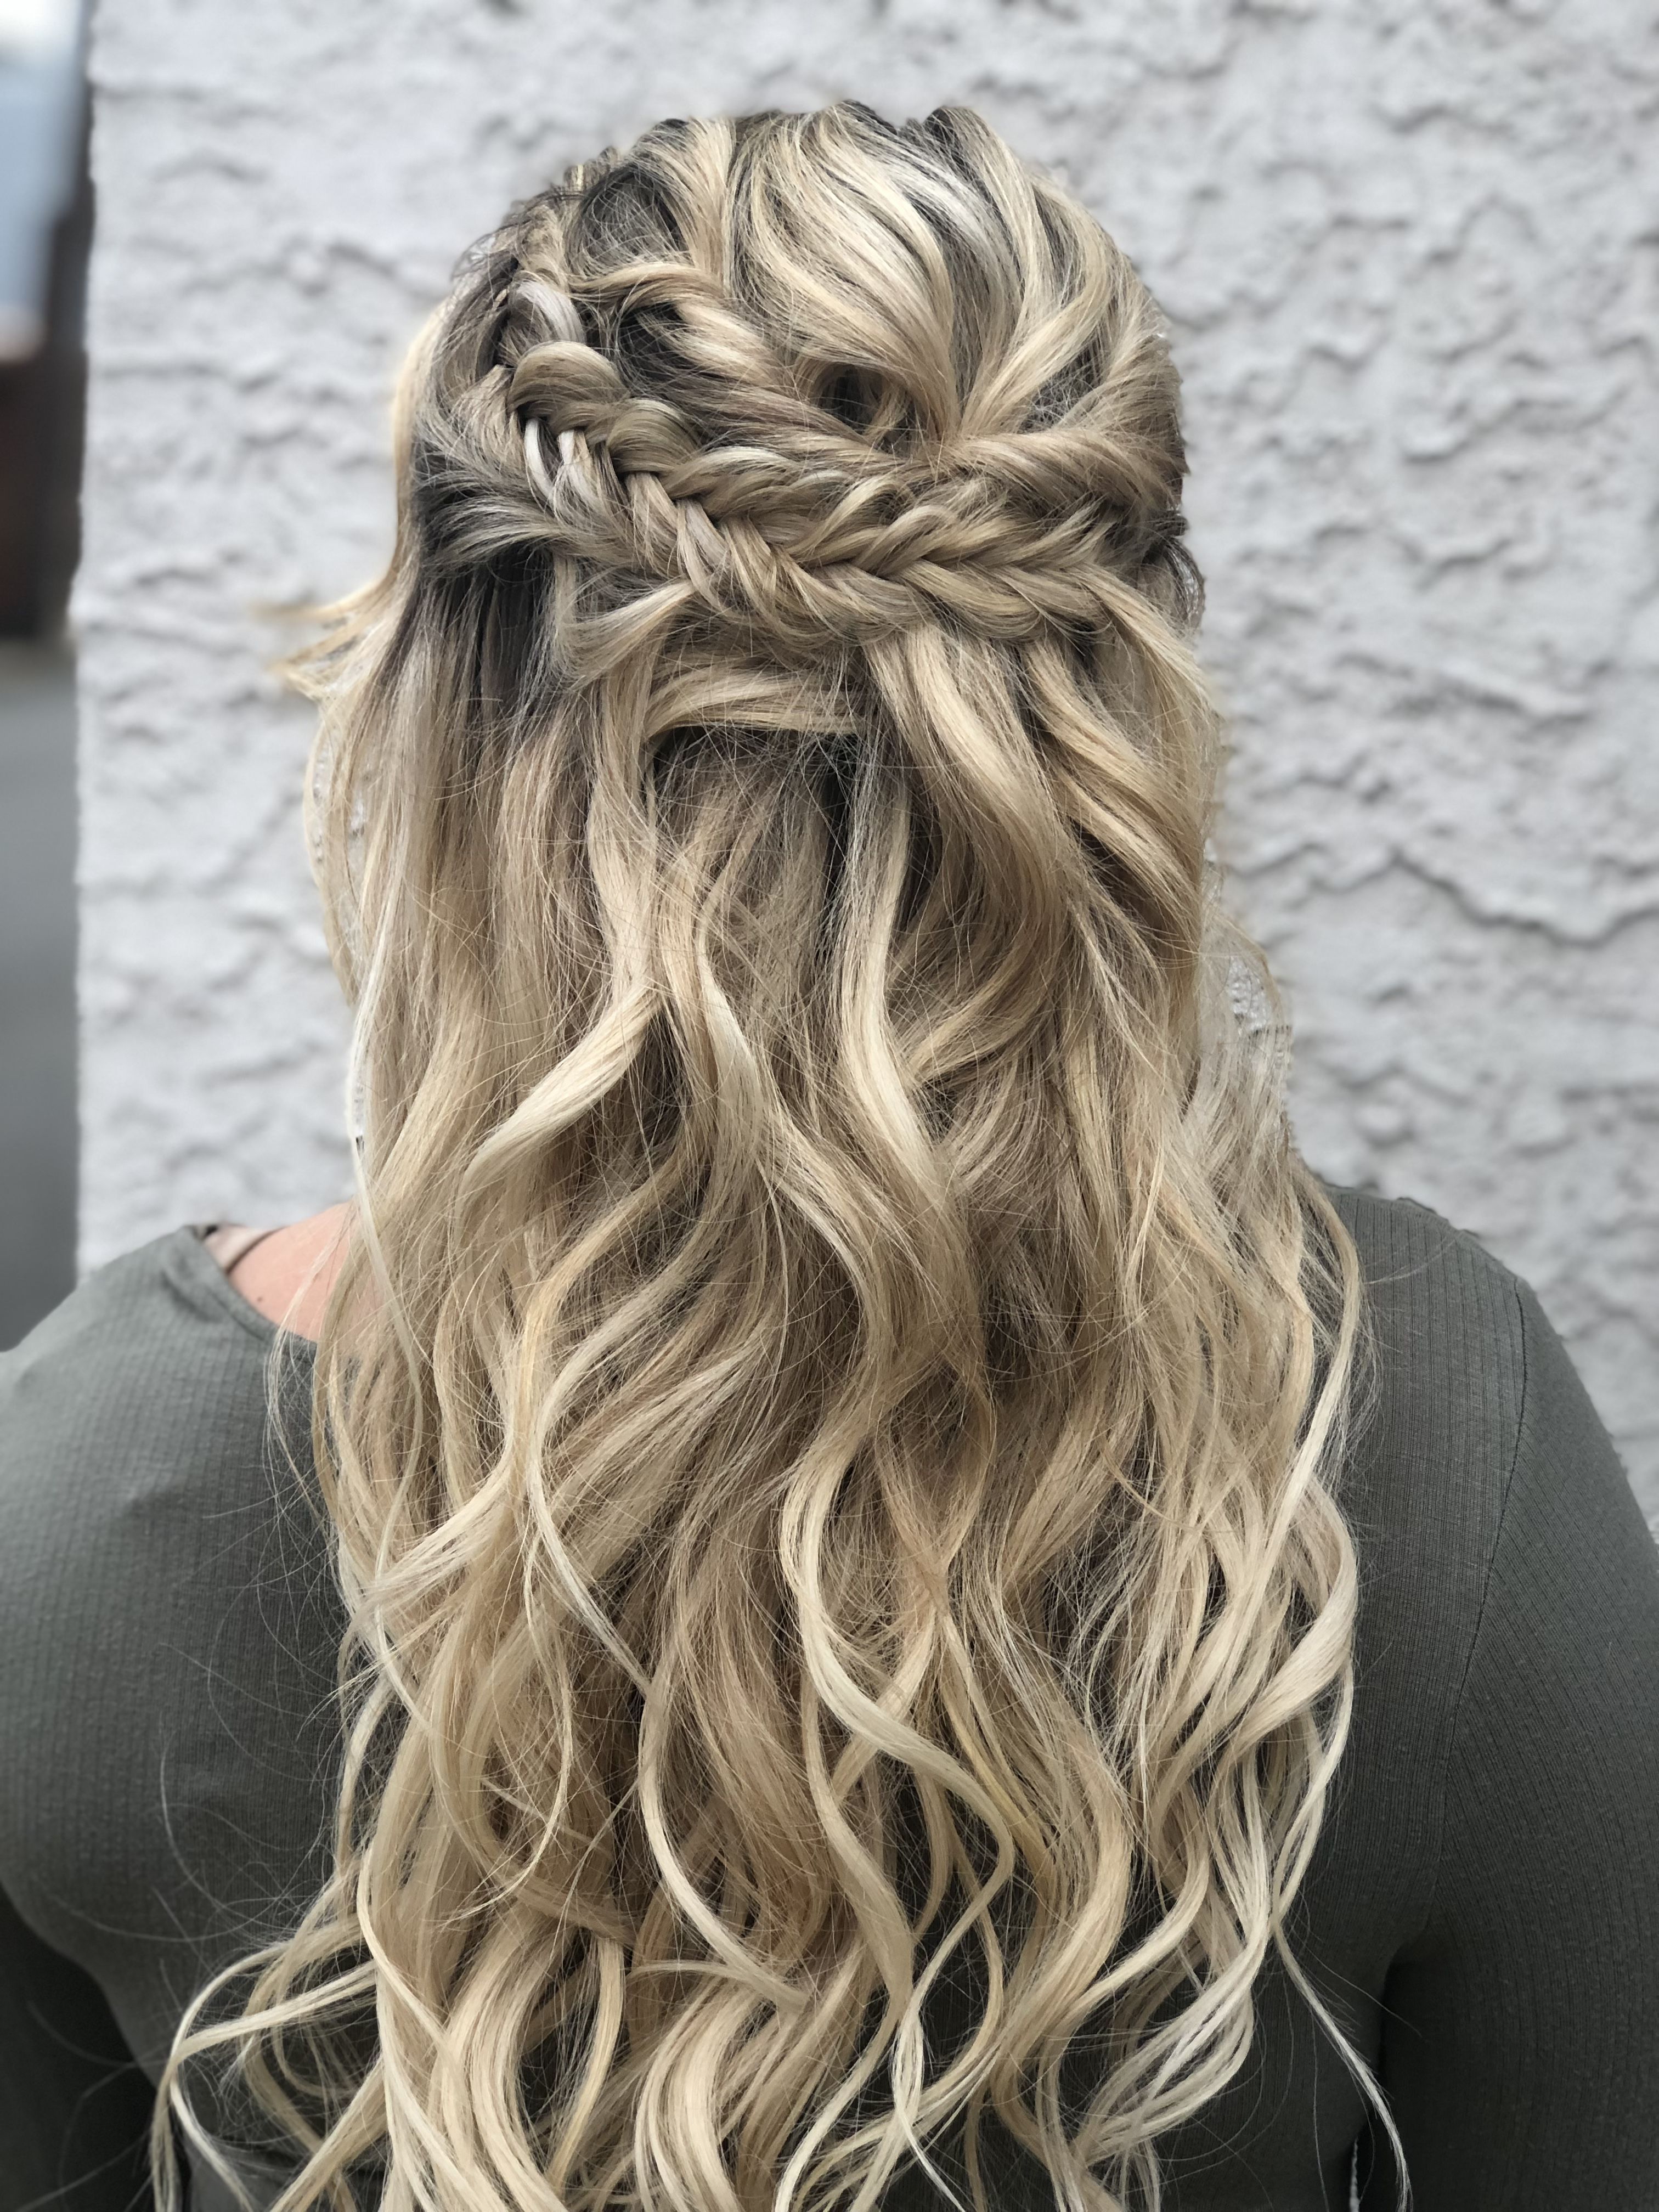 Newest Chic Bohemian Braid Hairstyles In Boho Bridal Hairstyle Half Up Half Down Fishtail Braids (View 14 of 20)